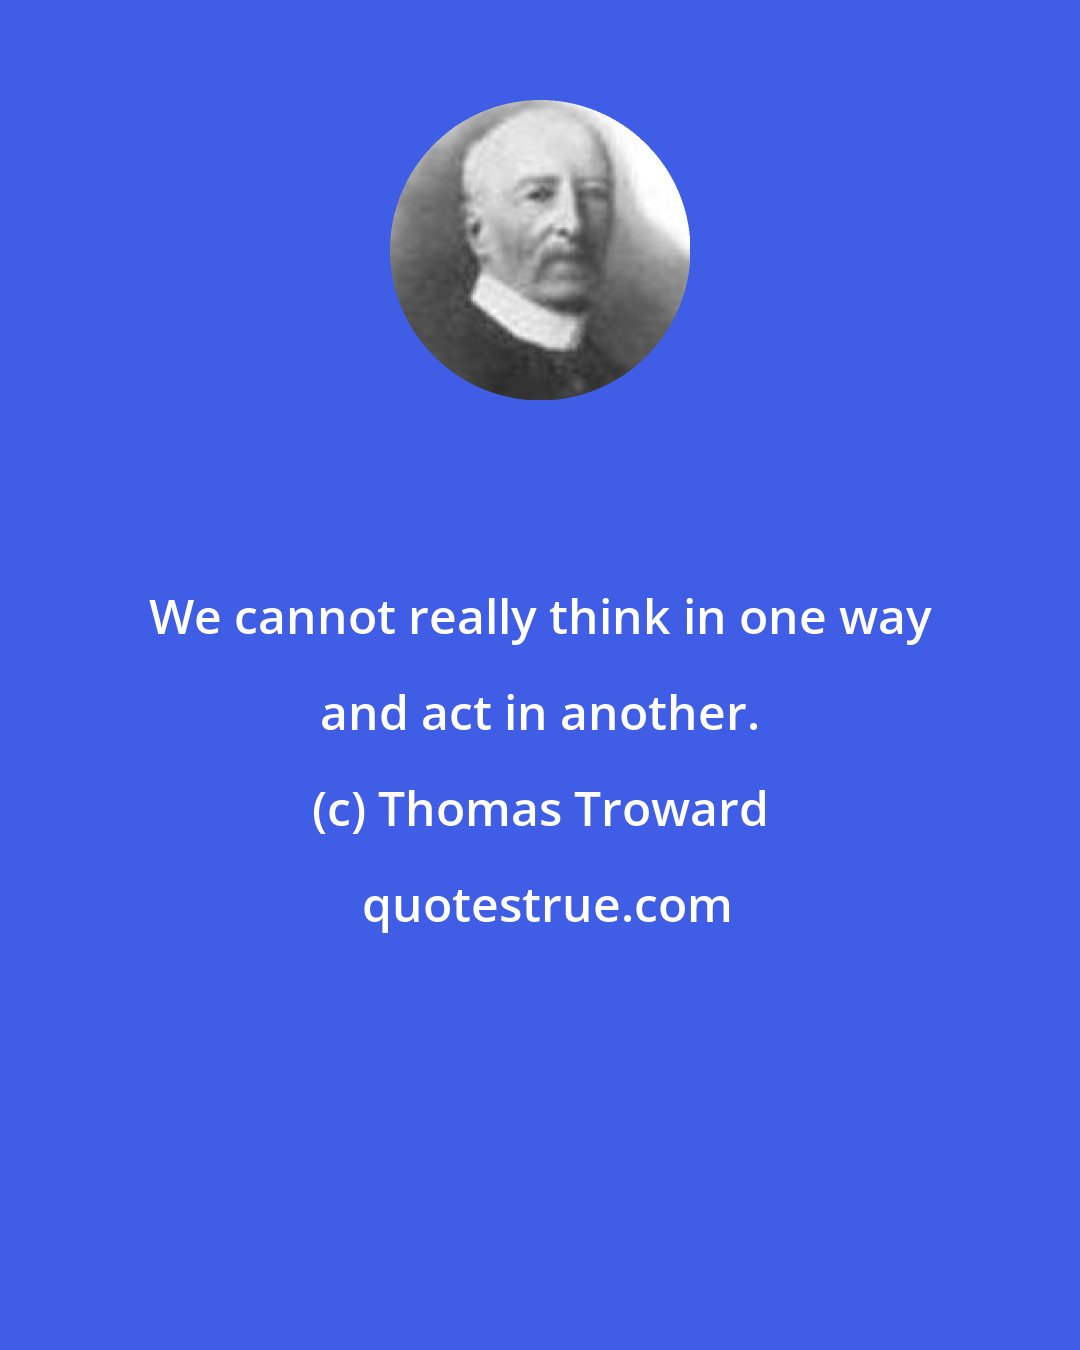 Thomas Troward: We cannot really think in one way and act in another.